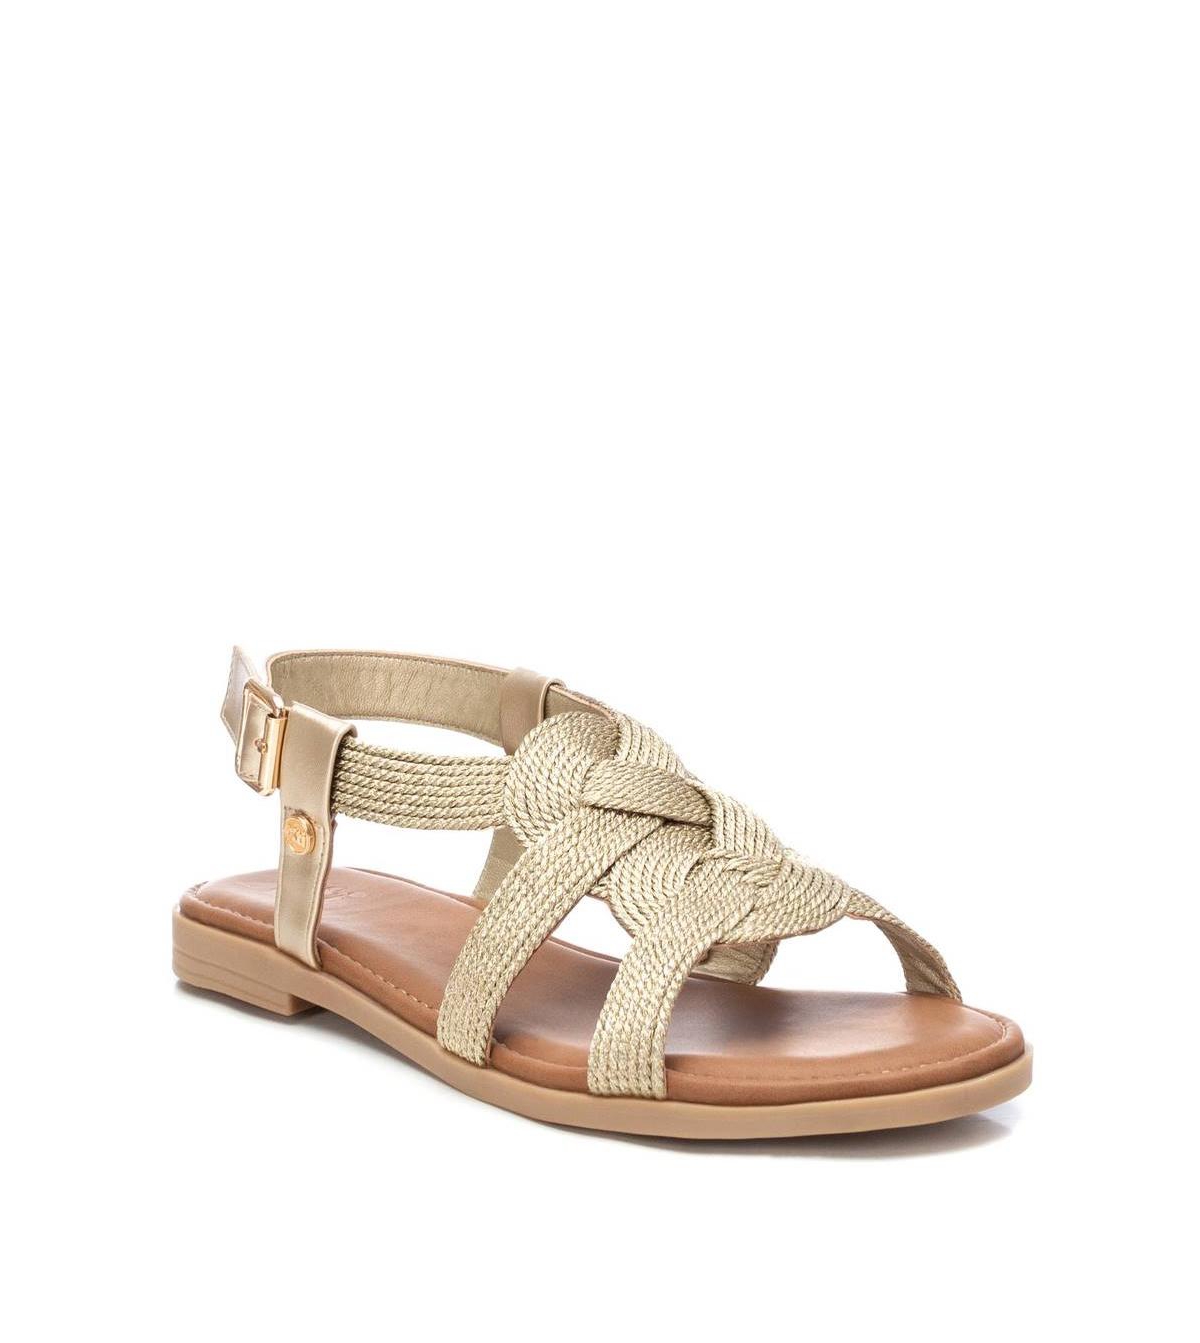 Women's Braided Flat Sandals By Xti, Gold - Gold